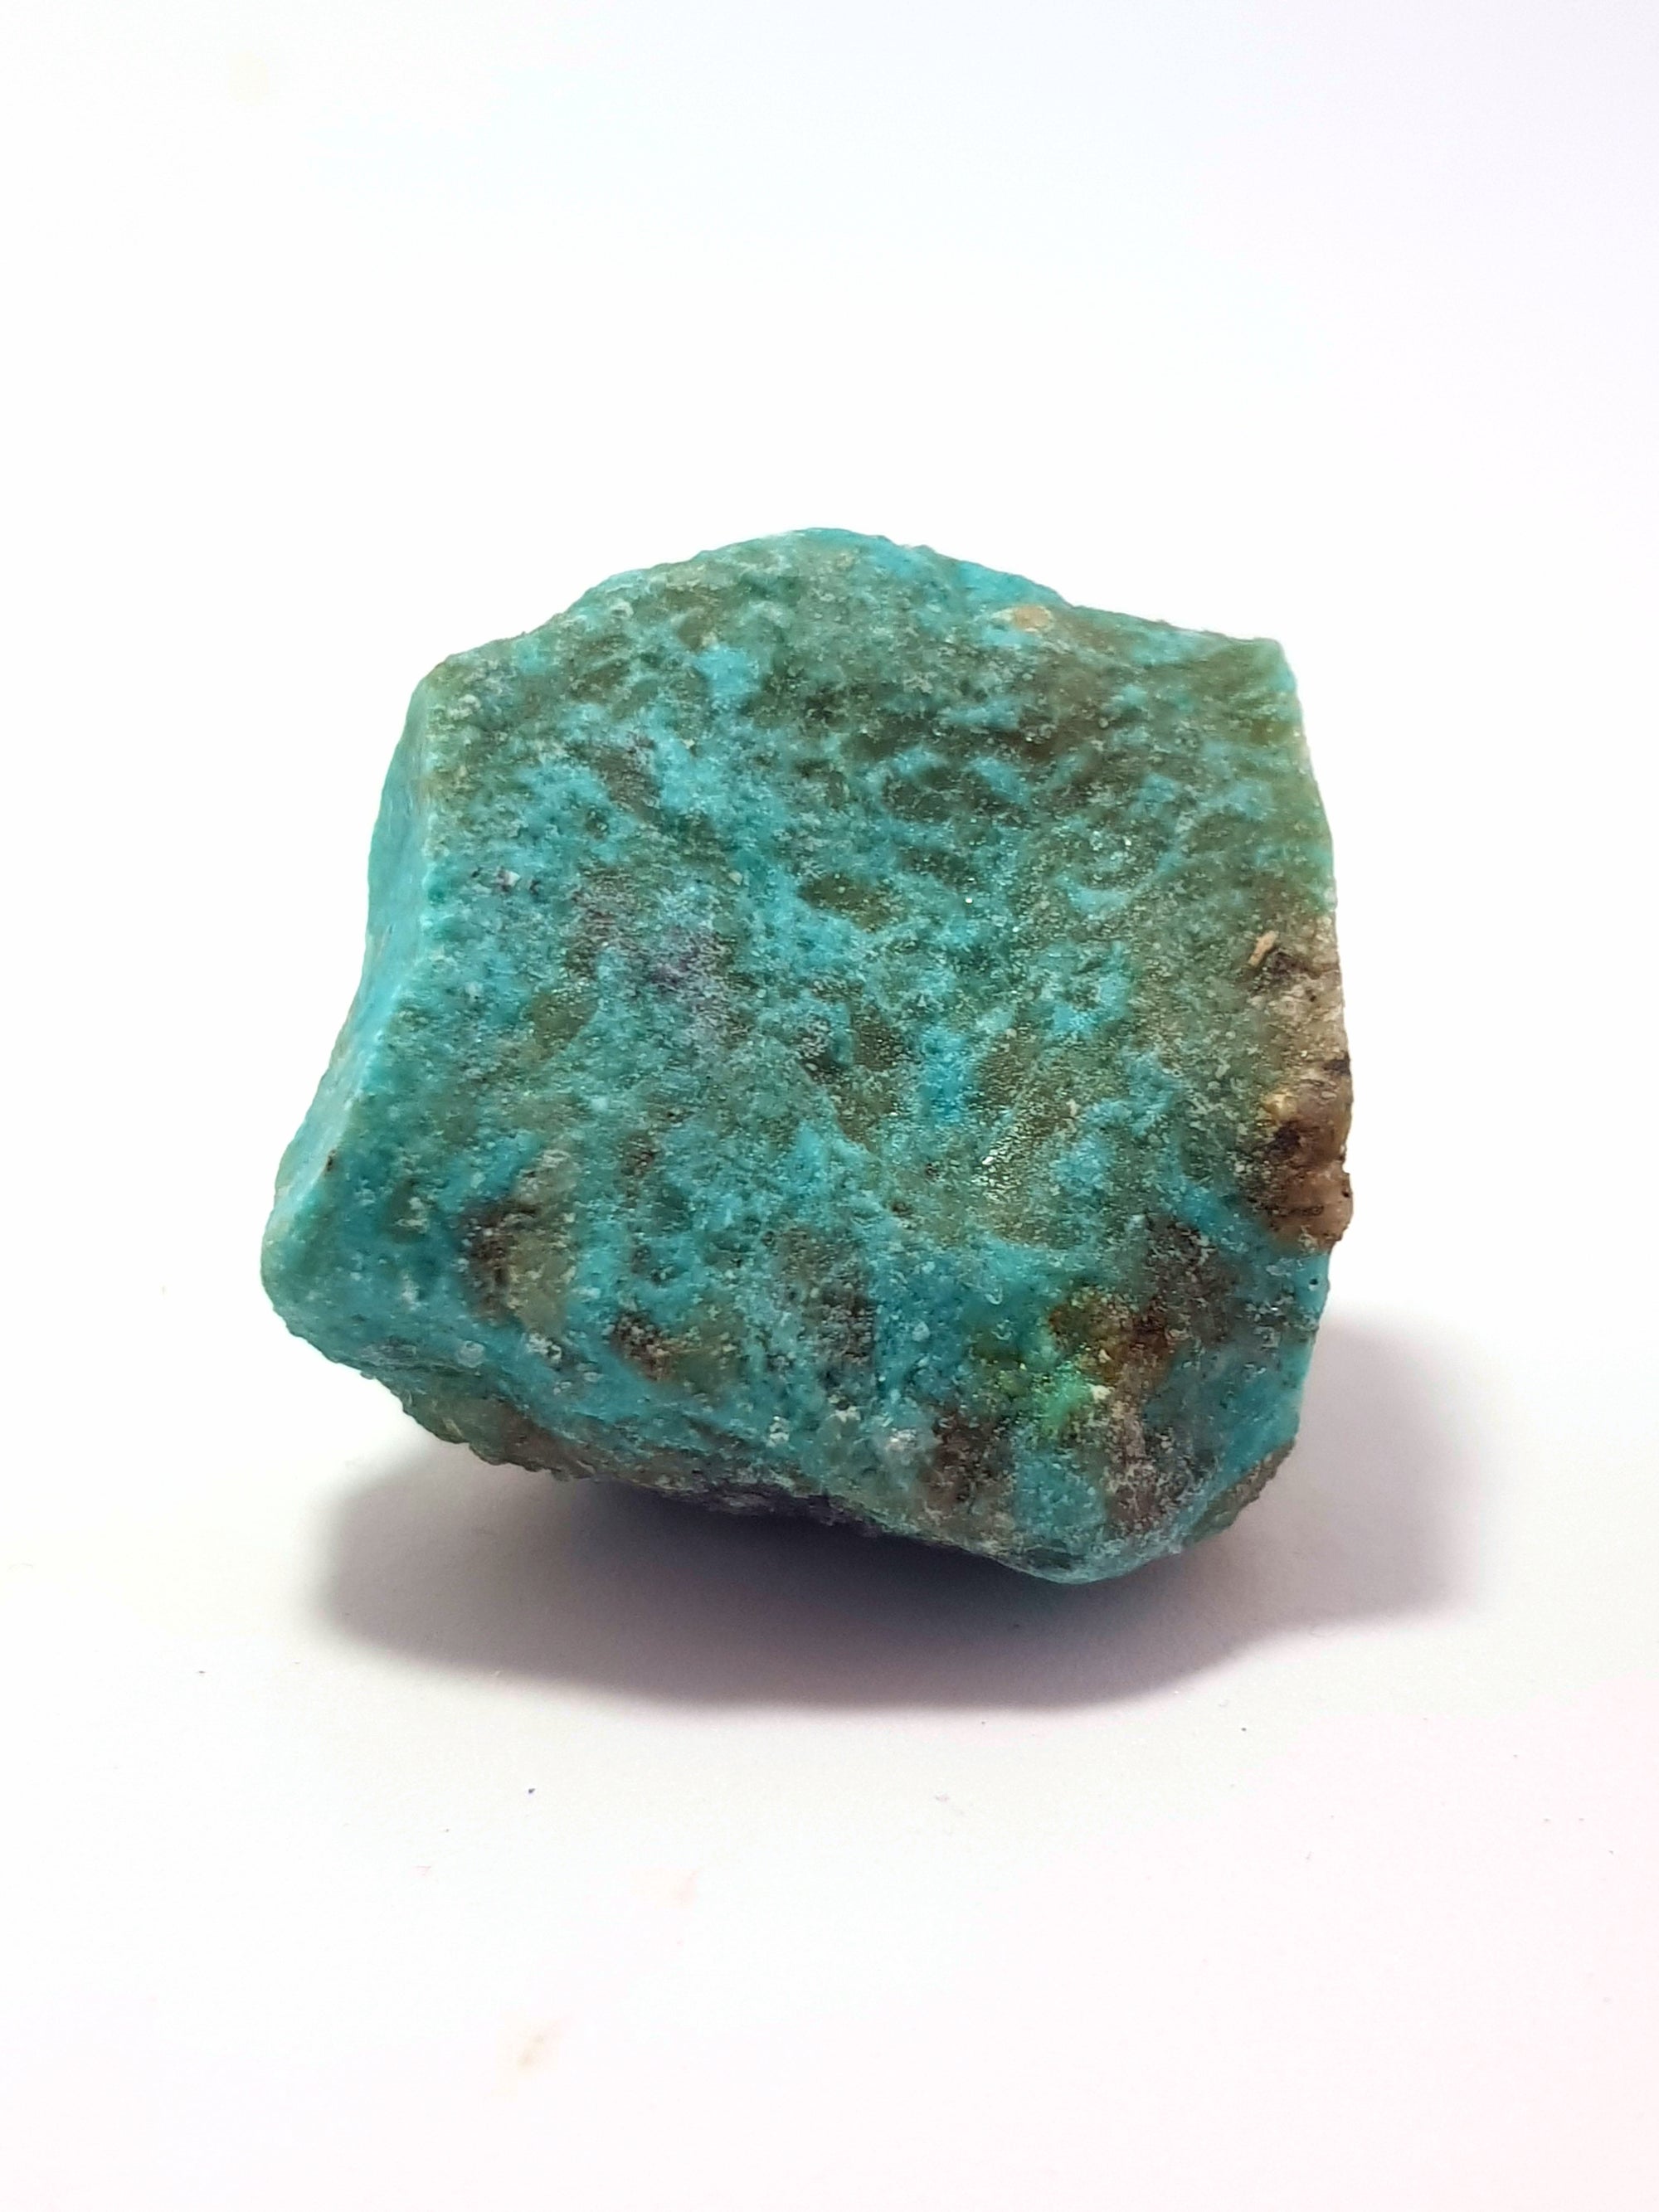 sample of raw kingman turquoise. this piece does not have a strong blue hue